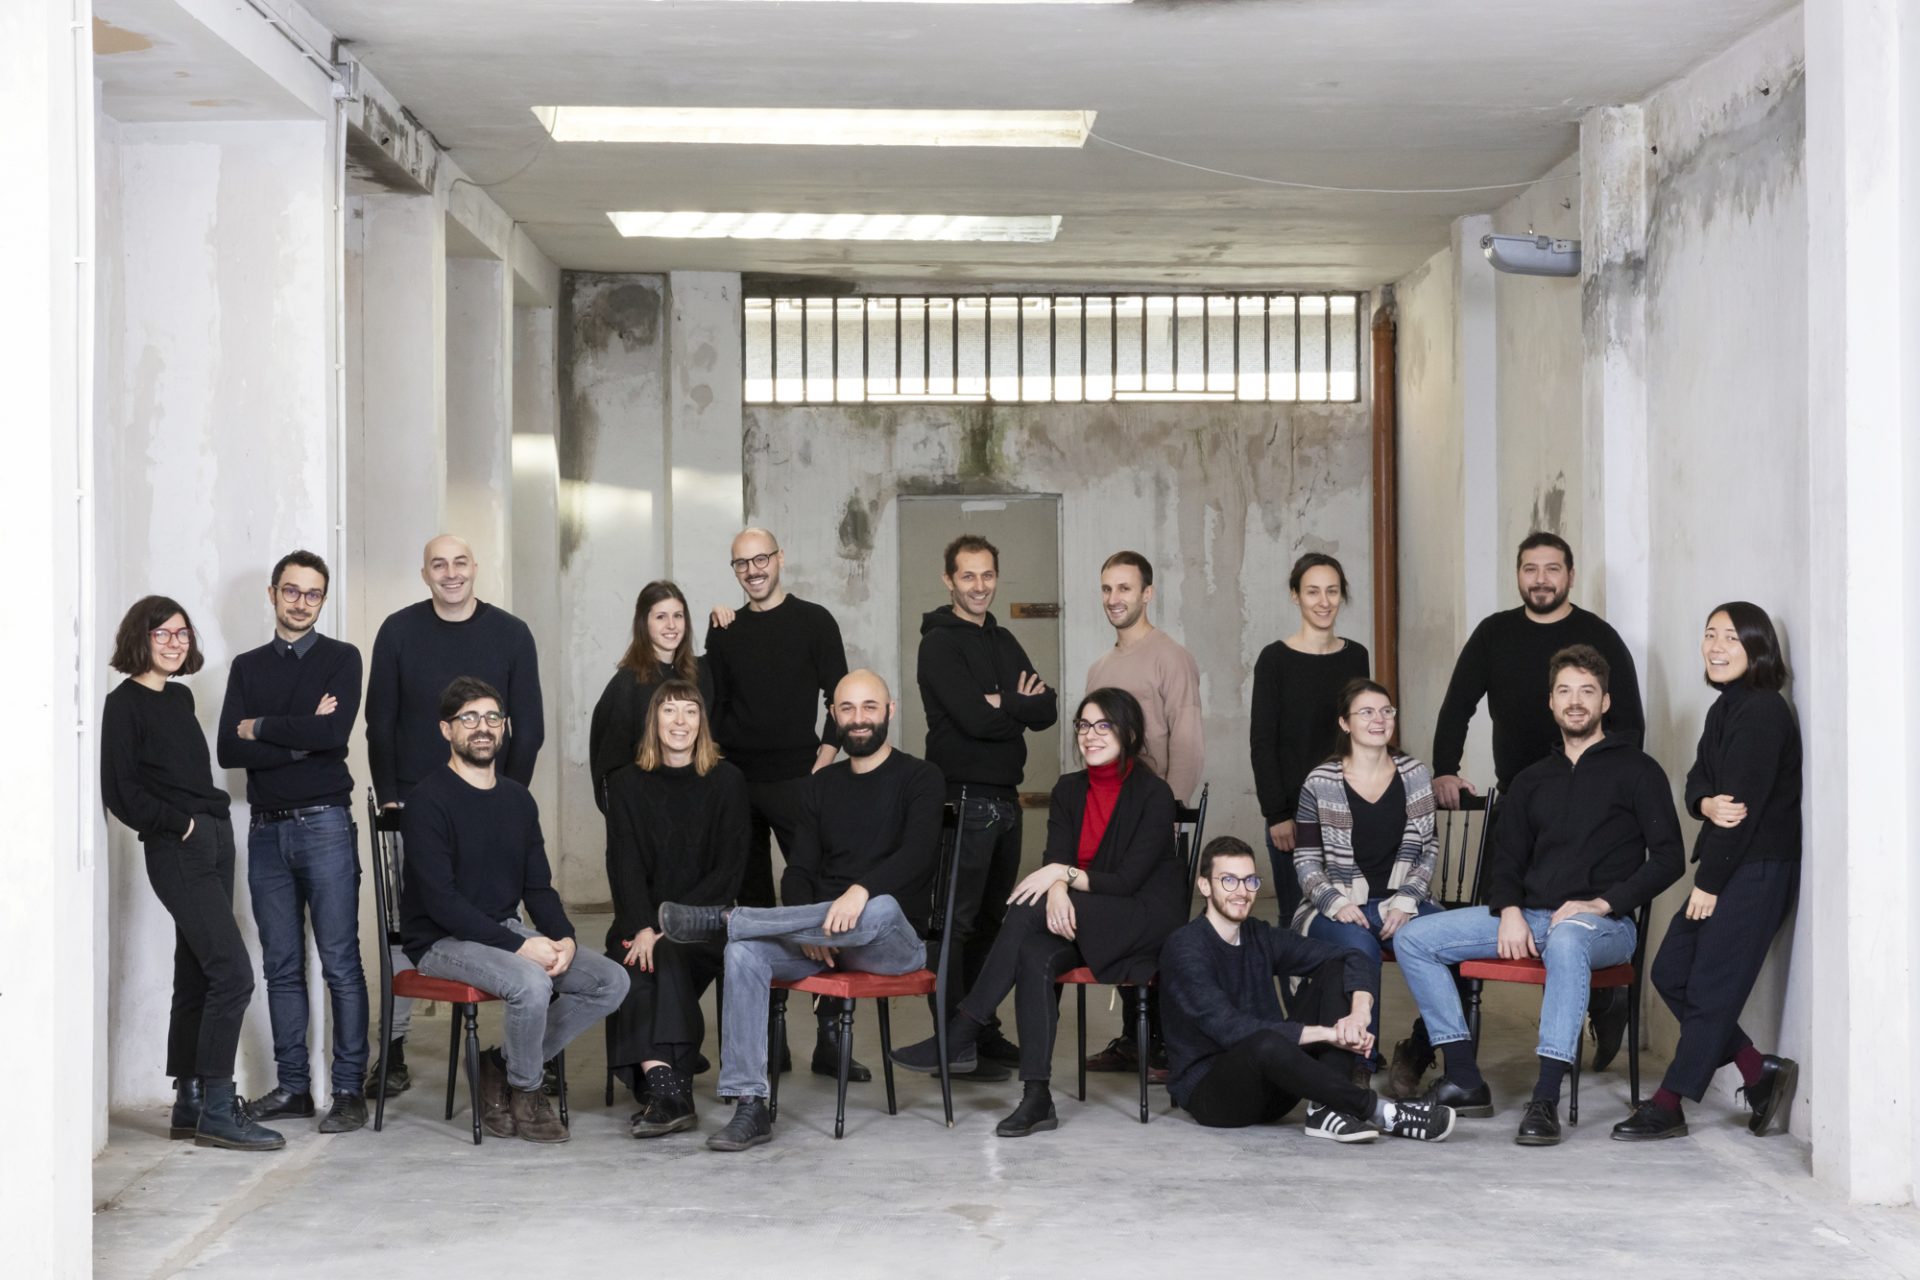 Whole team lamatilde, the architecture firm in Turin.